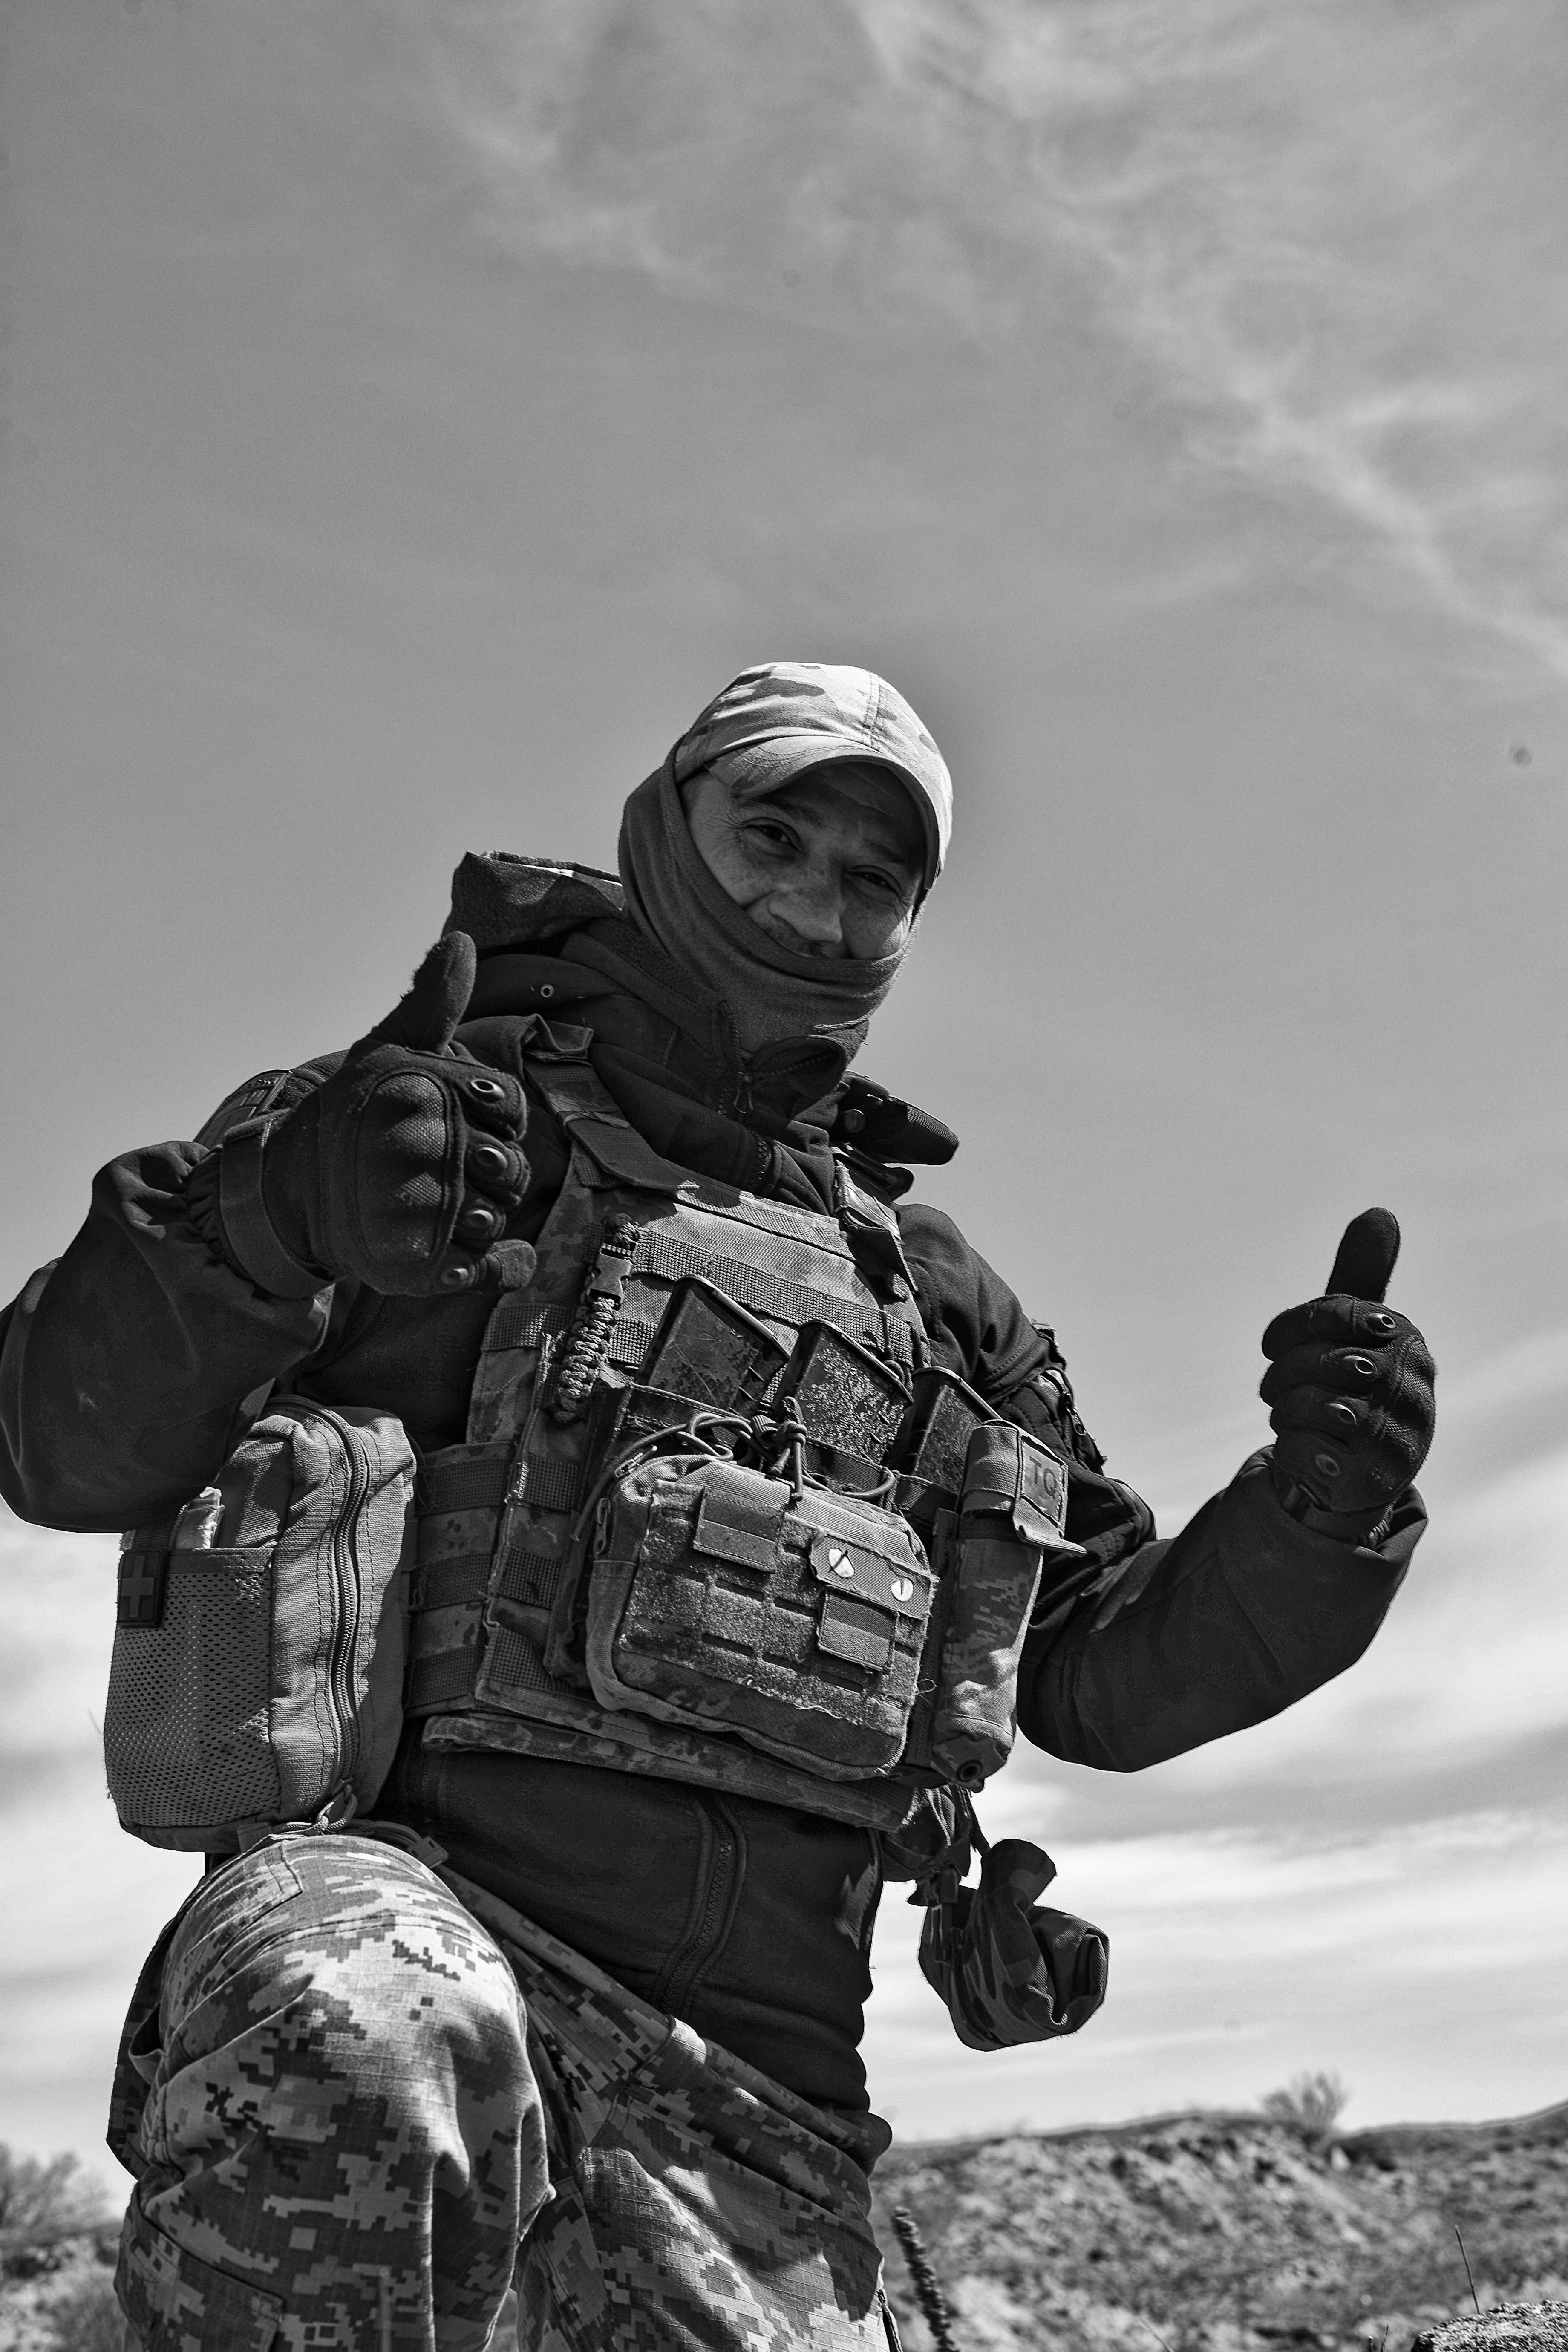 Ukrainian Armed Forces soldier displays cheerfulness in the face of adversity - Photography by Peter Masters